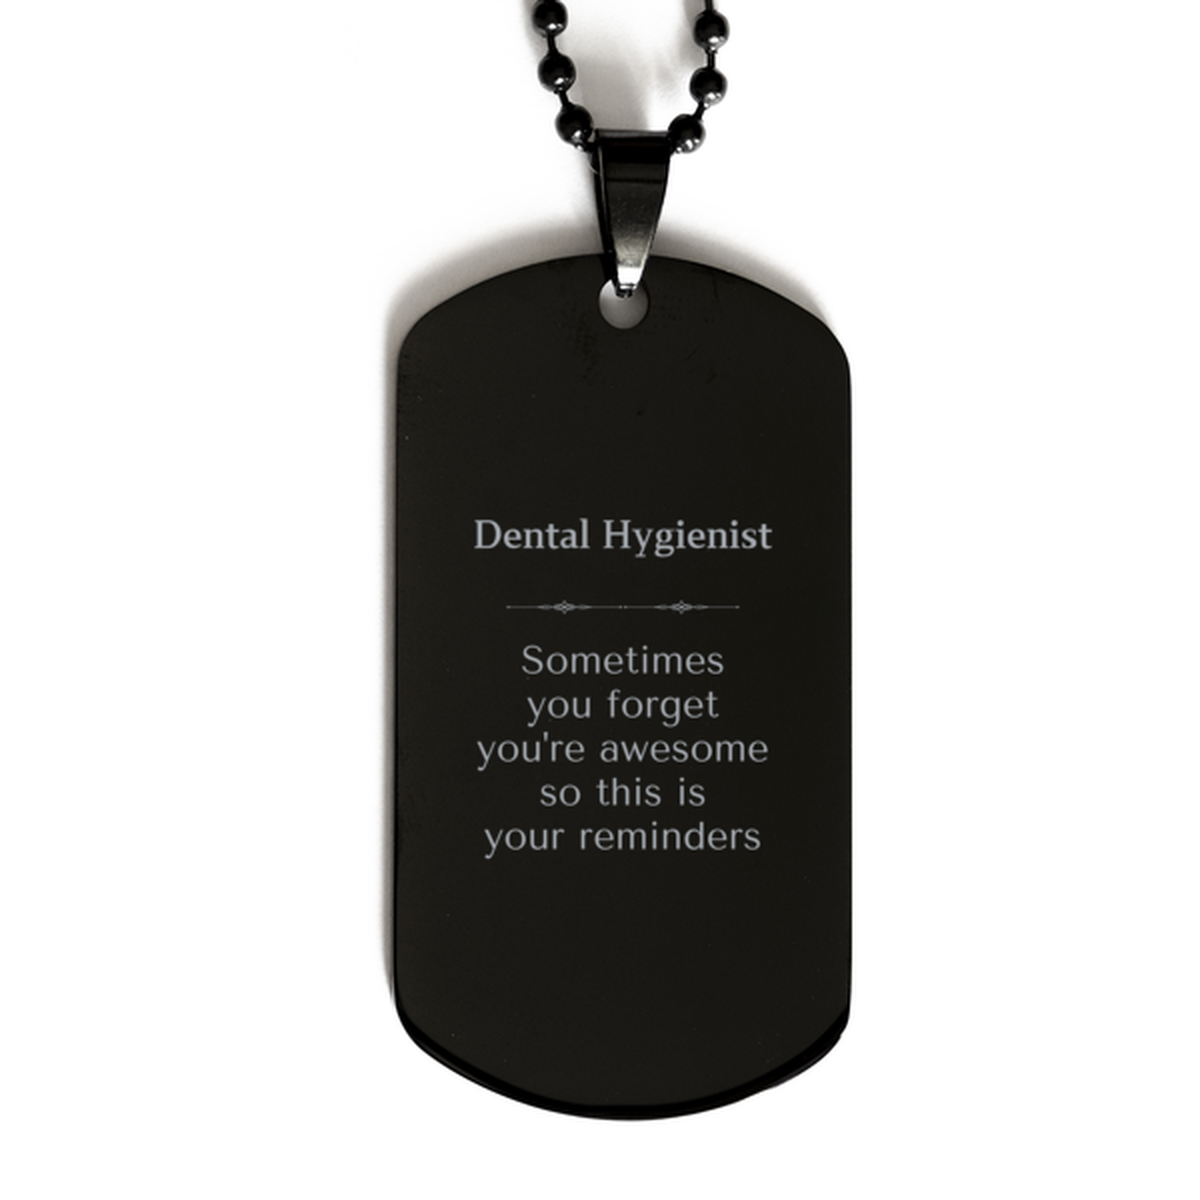 Sentimental Dental Hygienist Black Dog Tag, Dental Hygienist Sometimes you forget you're awesome so this is your reminders, Graduation Christmas Birthday Gifts for Dental Hygienist, Men, Women, Coworkers